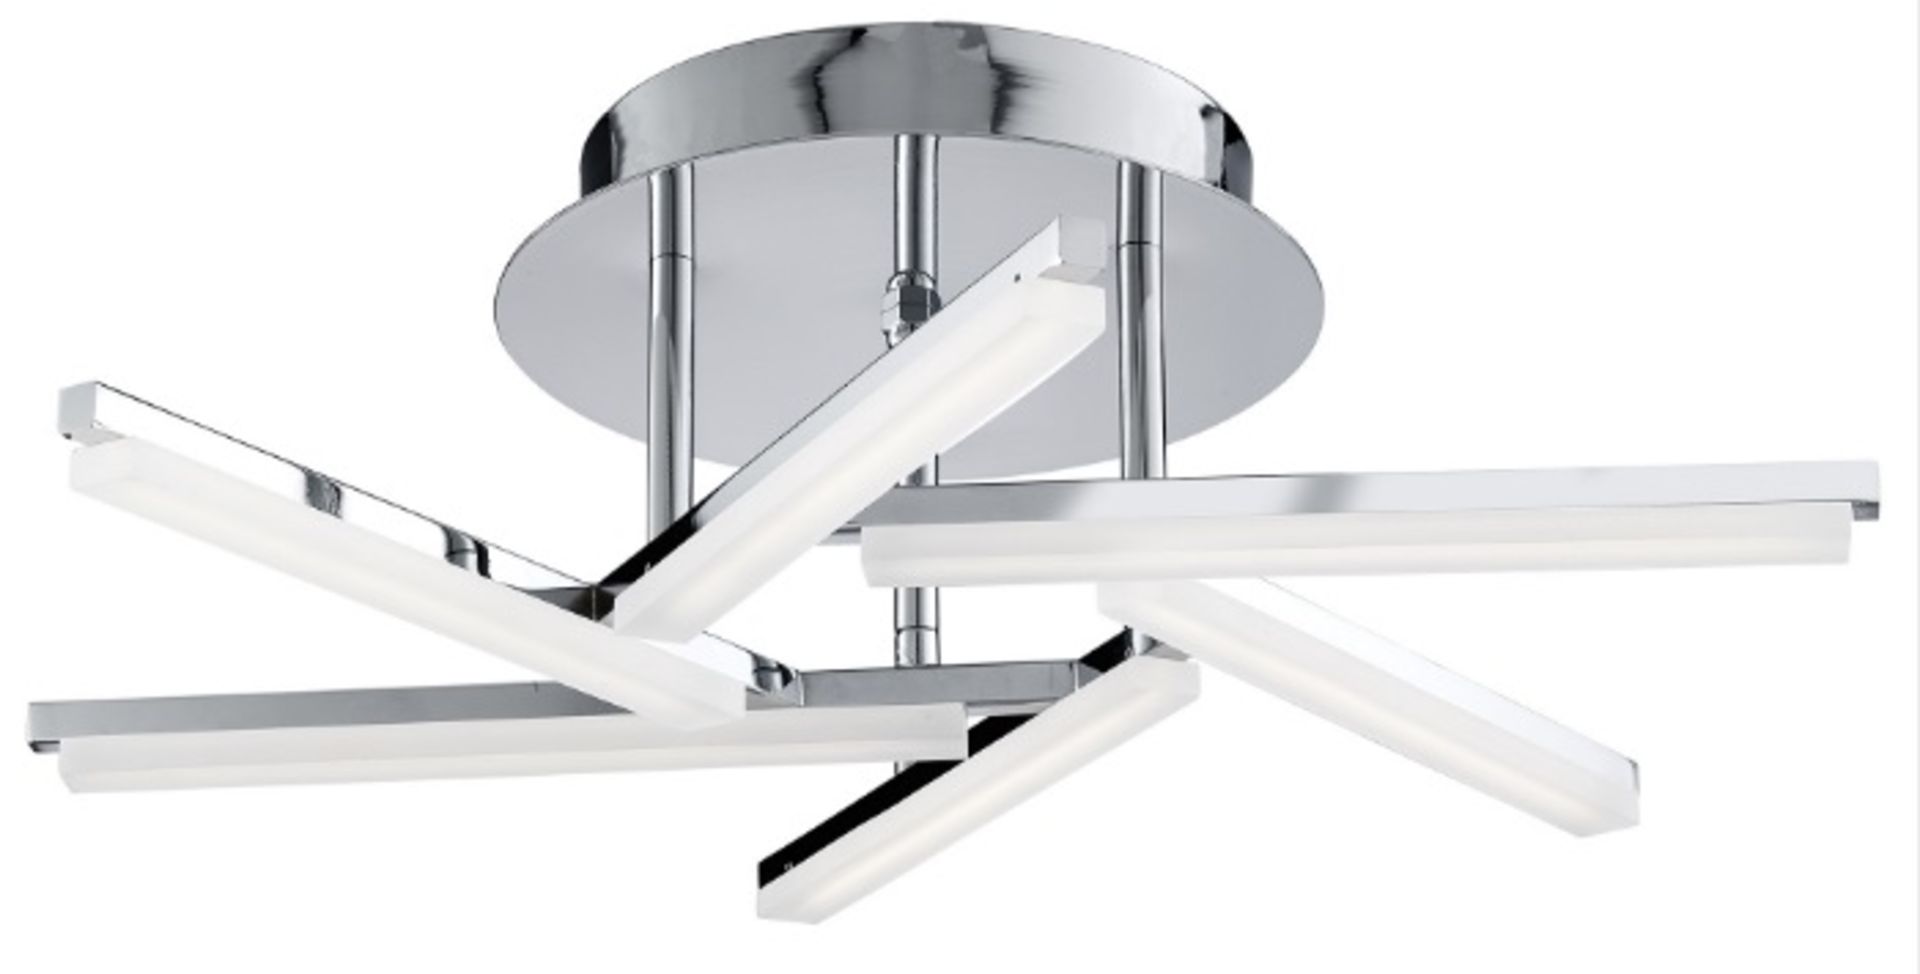 1 x Solexa 6 Light Led Chrome Ceiling Fitting With Frosted Criss Cross Pattern Arms - RRP £288.00